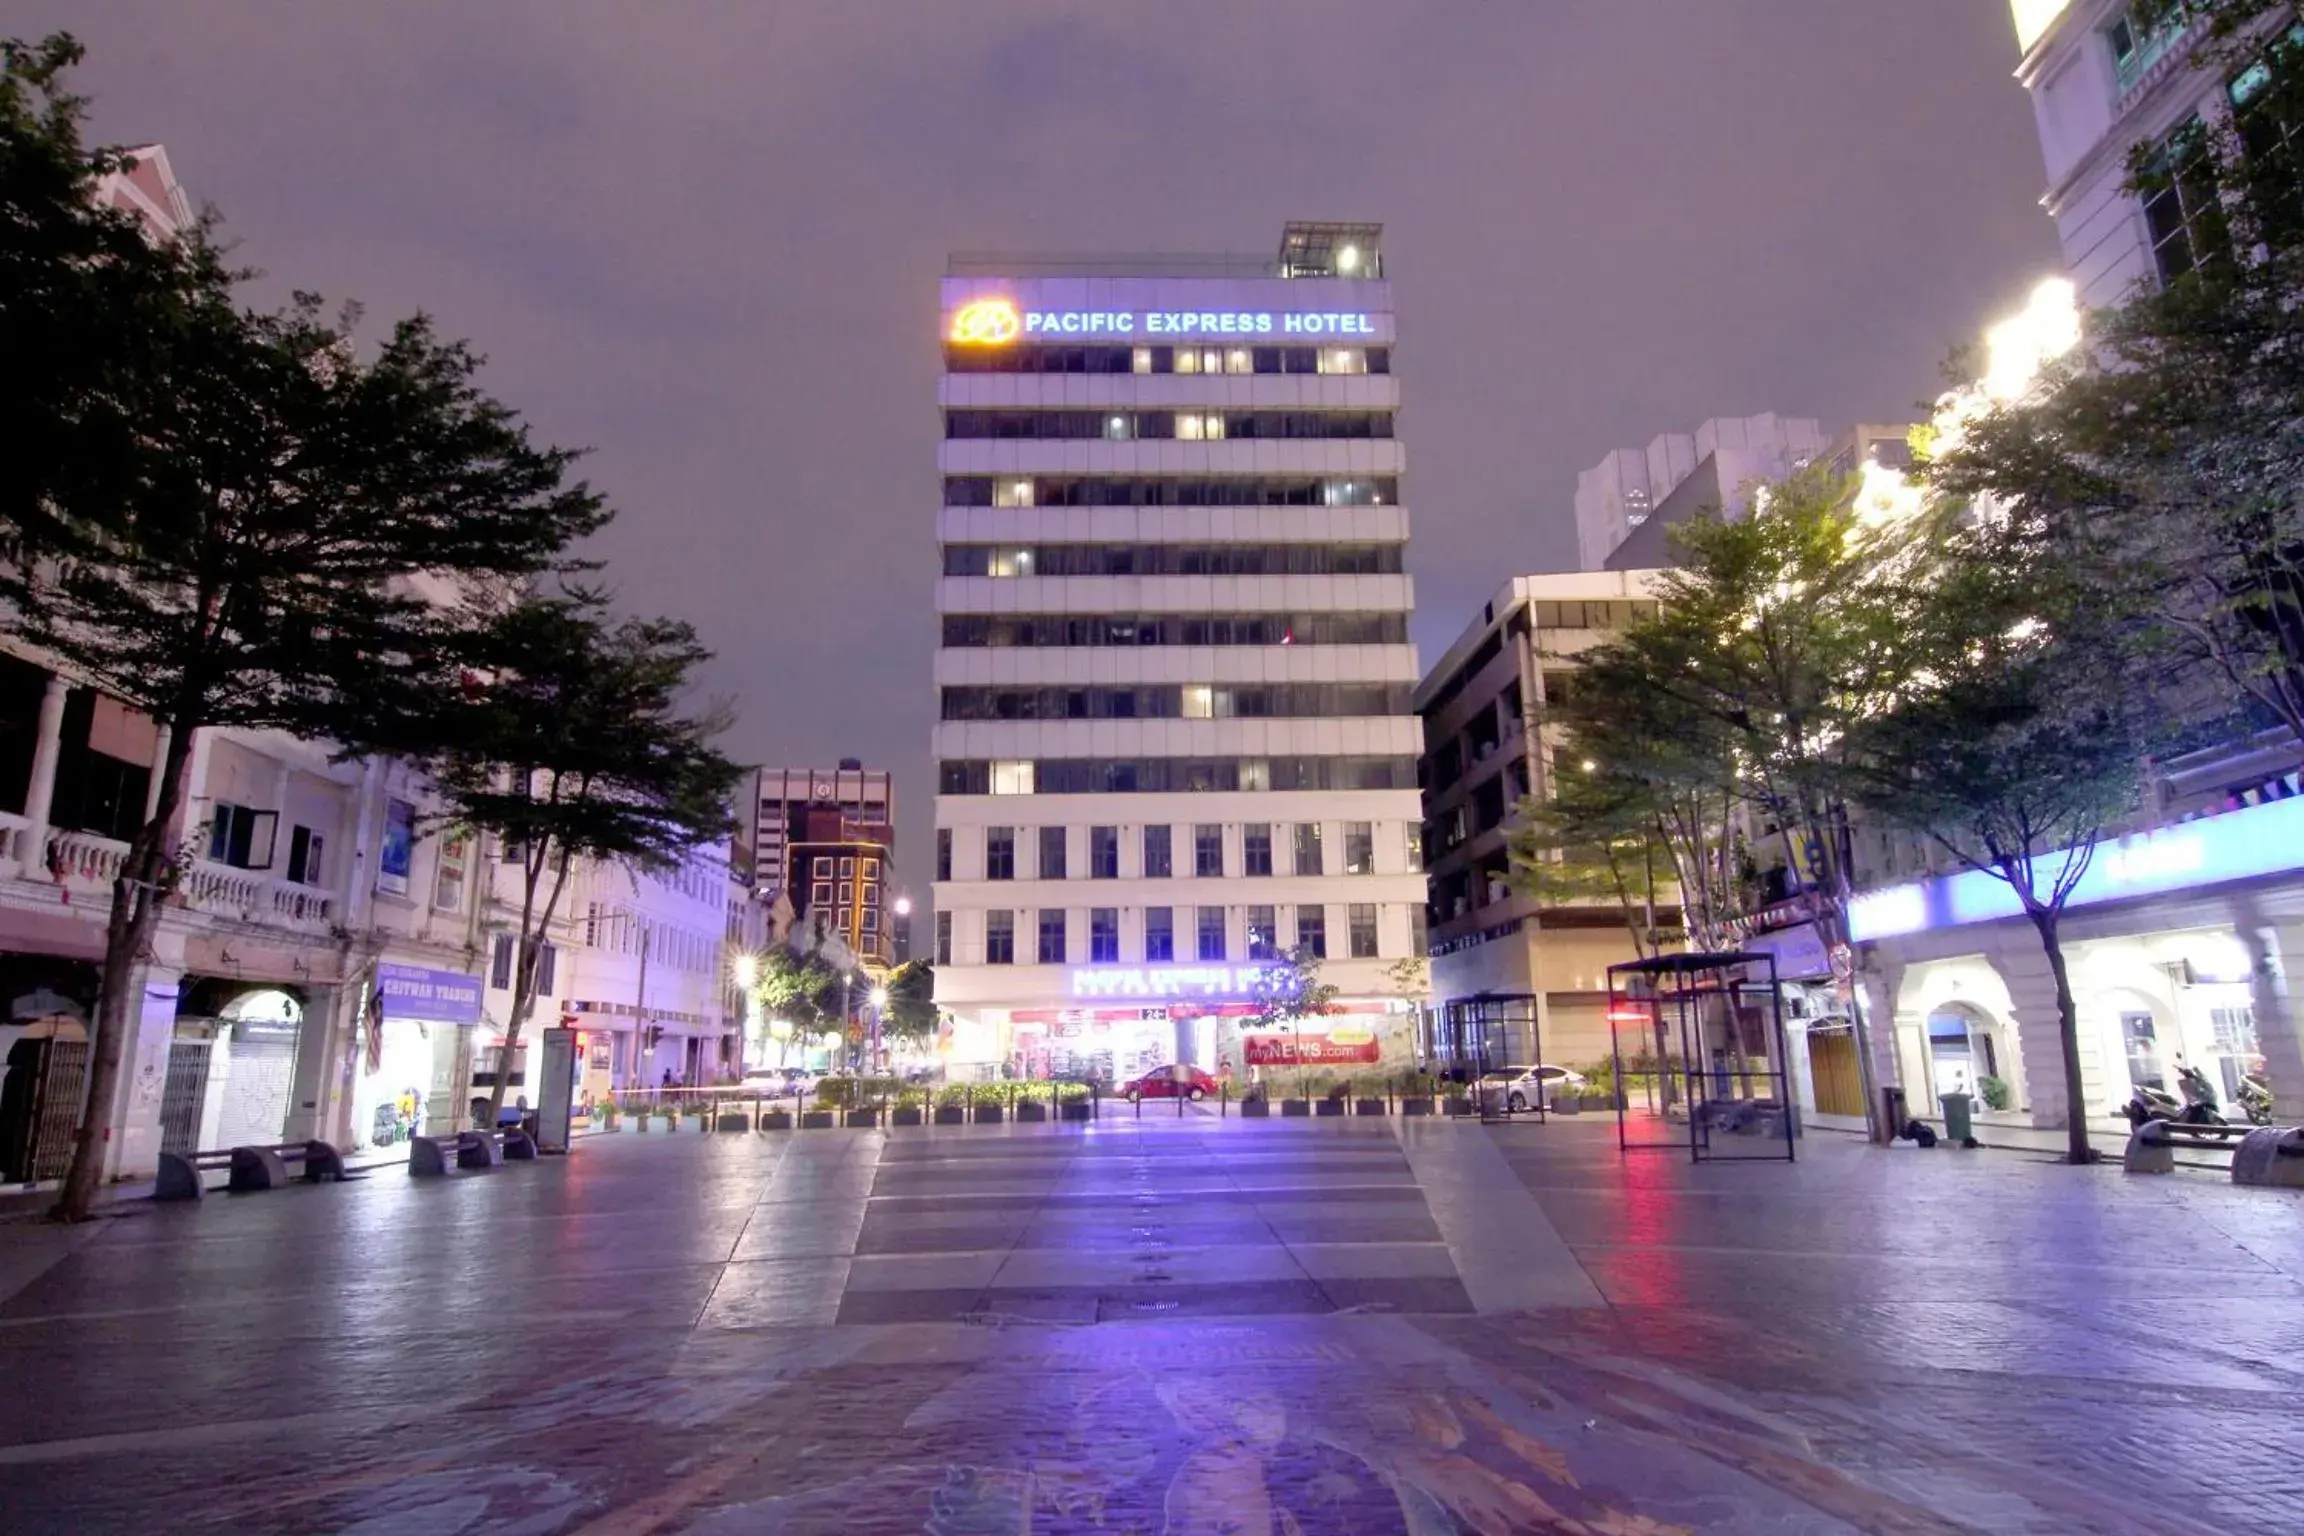 Property building in Pacific Express Hotel Central Market Kuala Lumpur